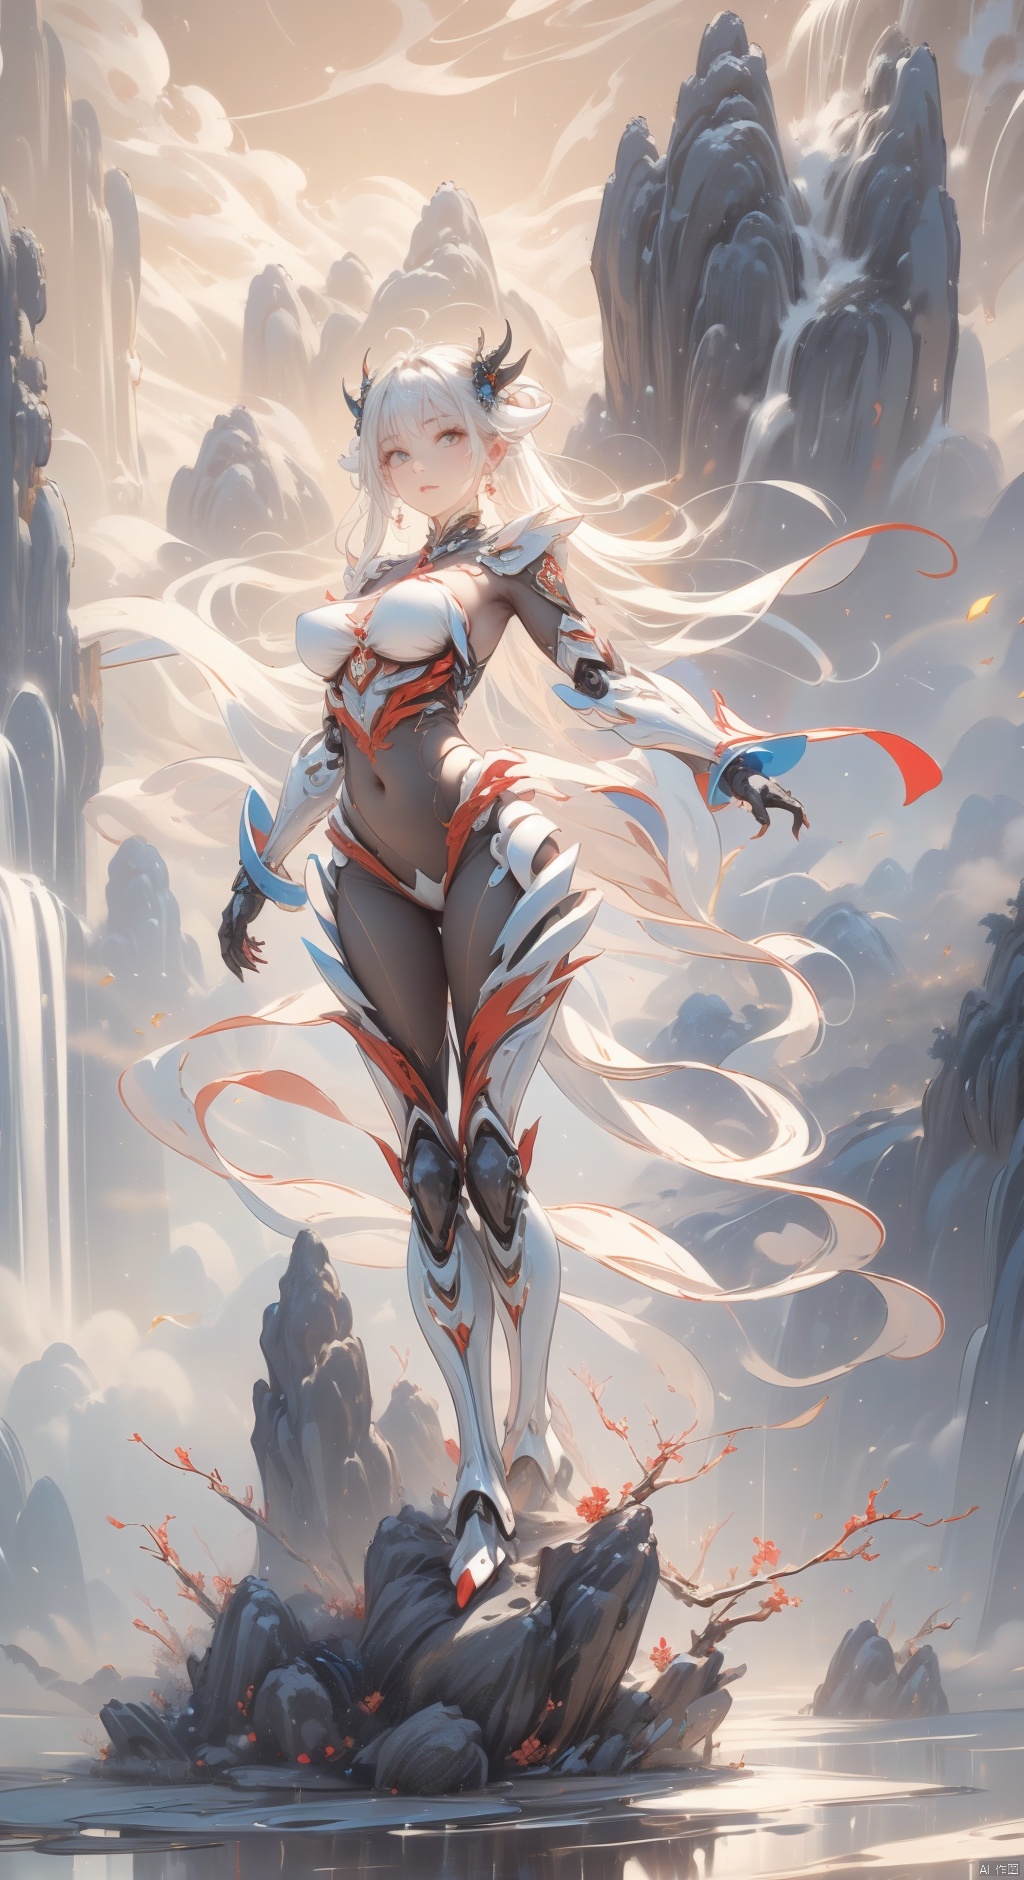  The game -Tower of Fantasy, the character -NEMESIS, (a half-human, half-mechanical beauty: 1.4), (wearing a black combat soft armor: 1.2), soft armor is inset with red, white, and gold decorations, both highlight her half-human, half-mechanical characteristics, but also give her a mysterious charm. Her long hair hung loose behind her, flowing gently, in stark contrast to the grim style of the outfit. There was a firmness in her eyes, as if she were ready to fight for justice whenever and wherever she could, eastern_dragon, Dragon and girl